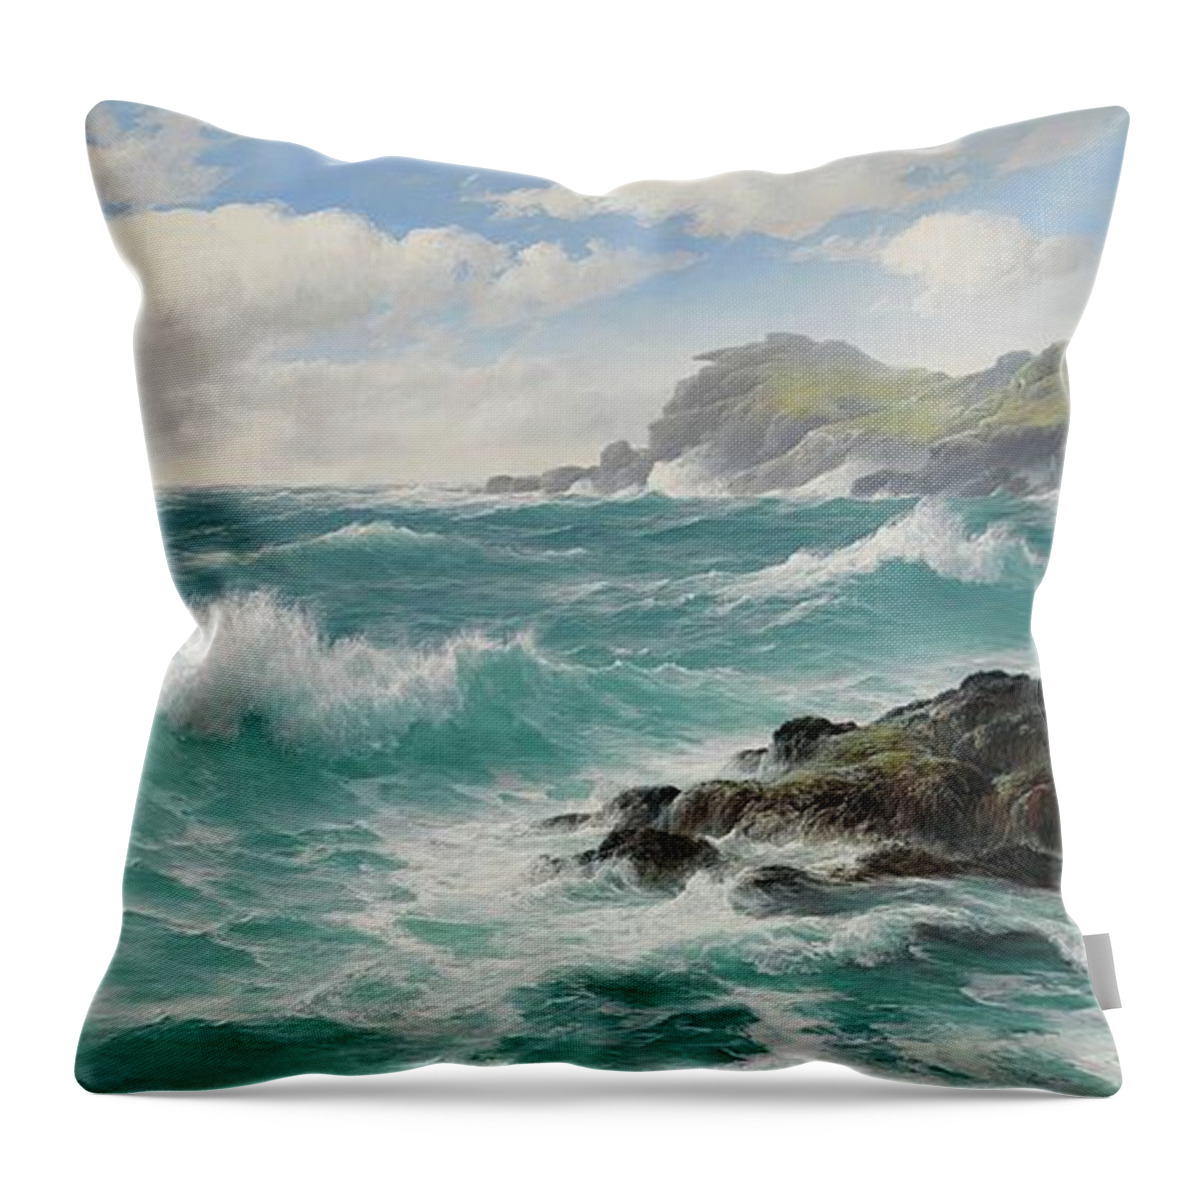 Seascape Throw Pillow featuring the painting Waves Off The Cornish Coast by David James